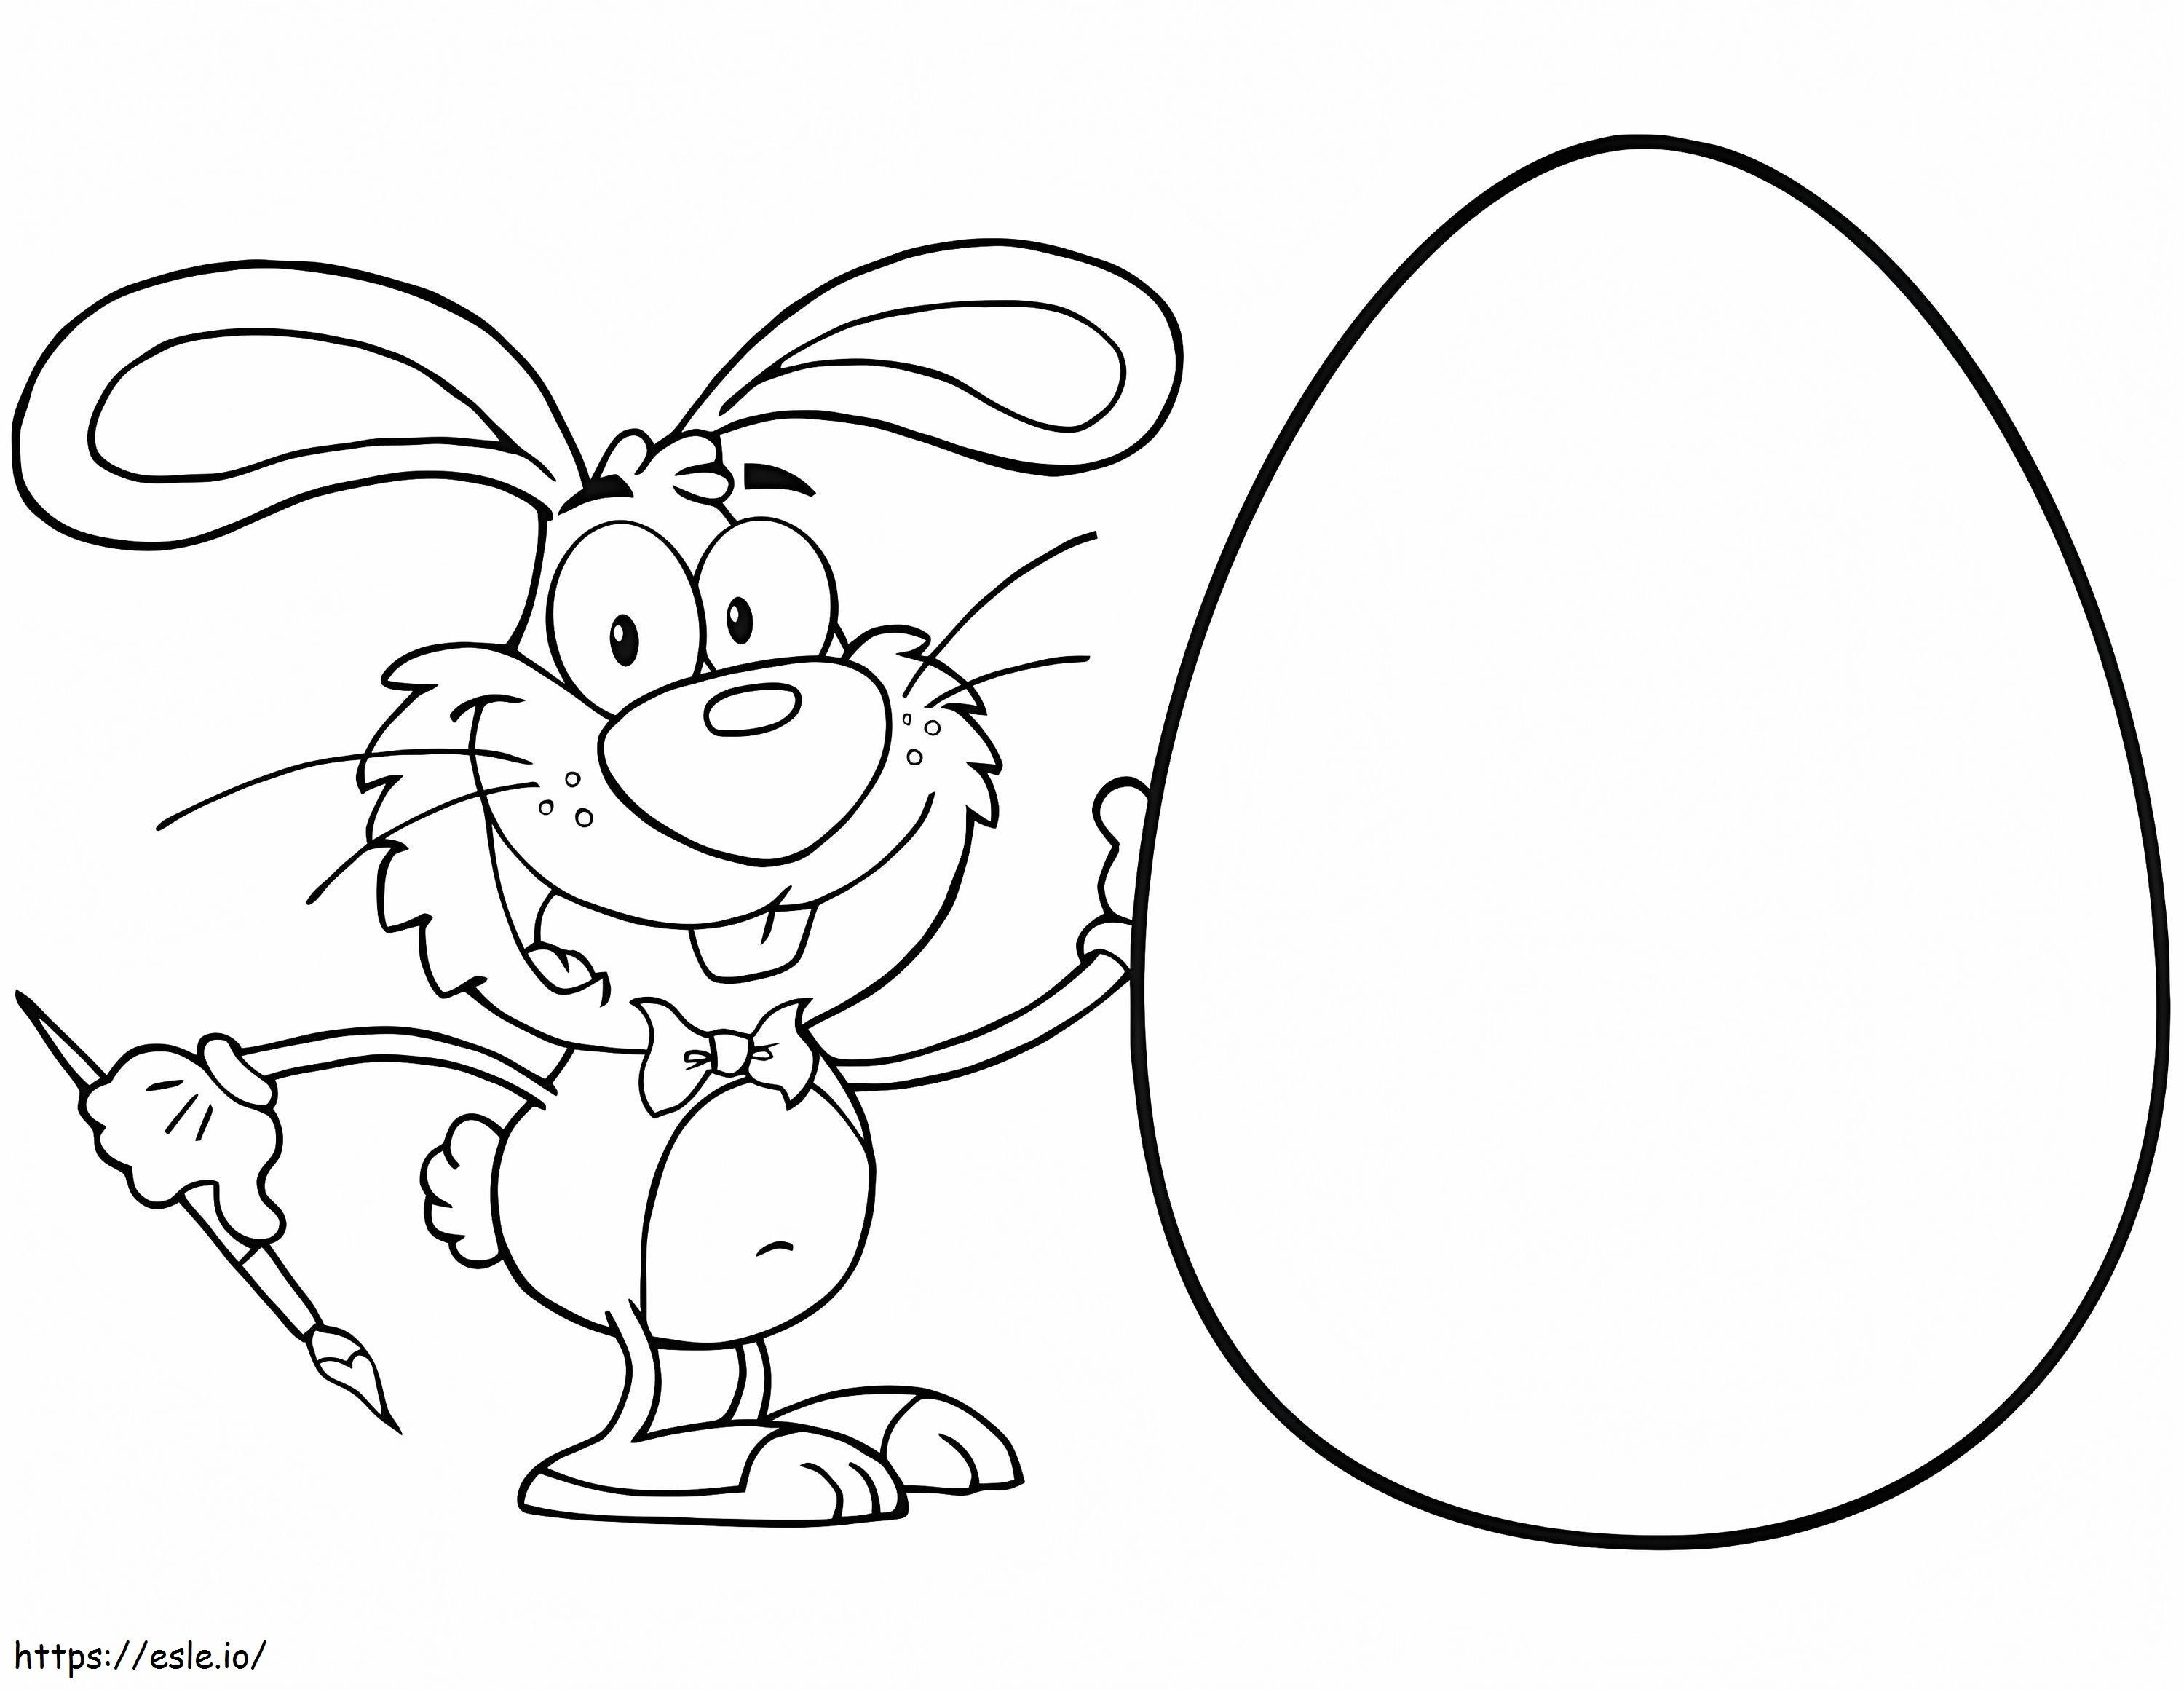 Easter Rabbit With Big Egg coloring page